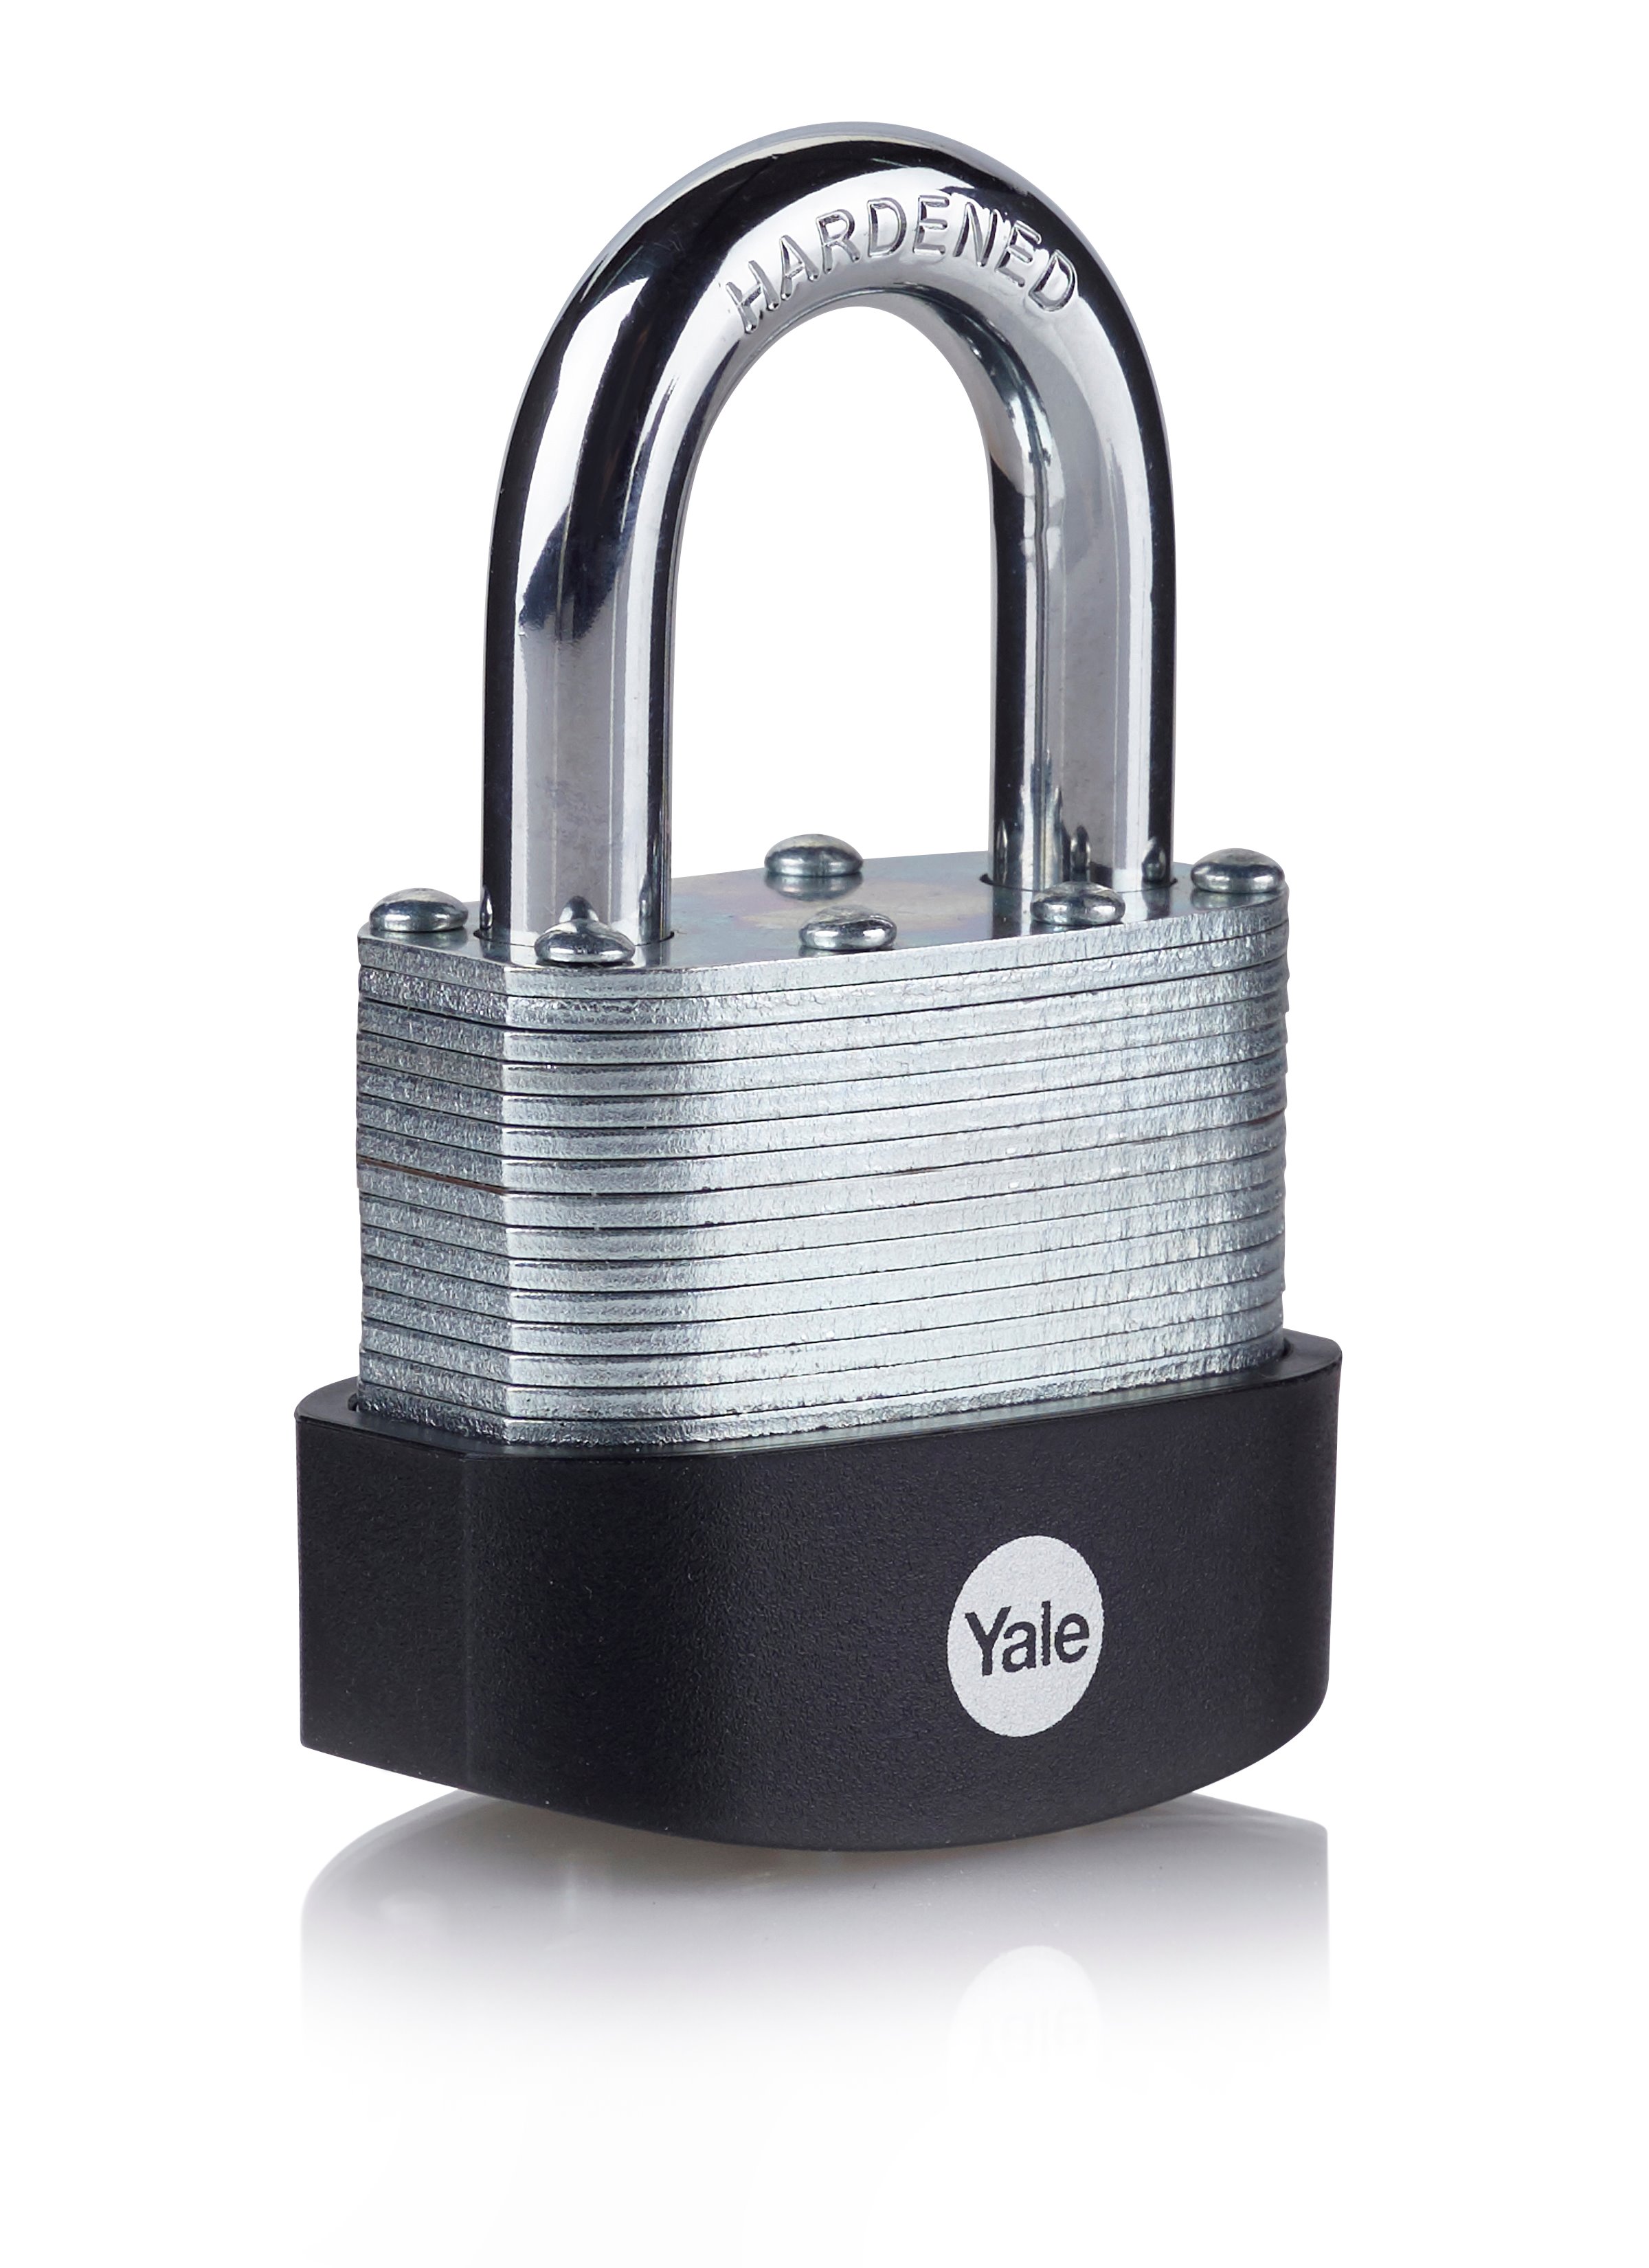 https://static-mpc.assaabloy.com/yalefile//Fetchfile.aspx?id=42214